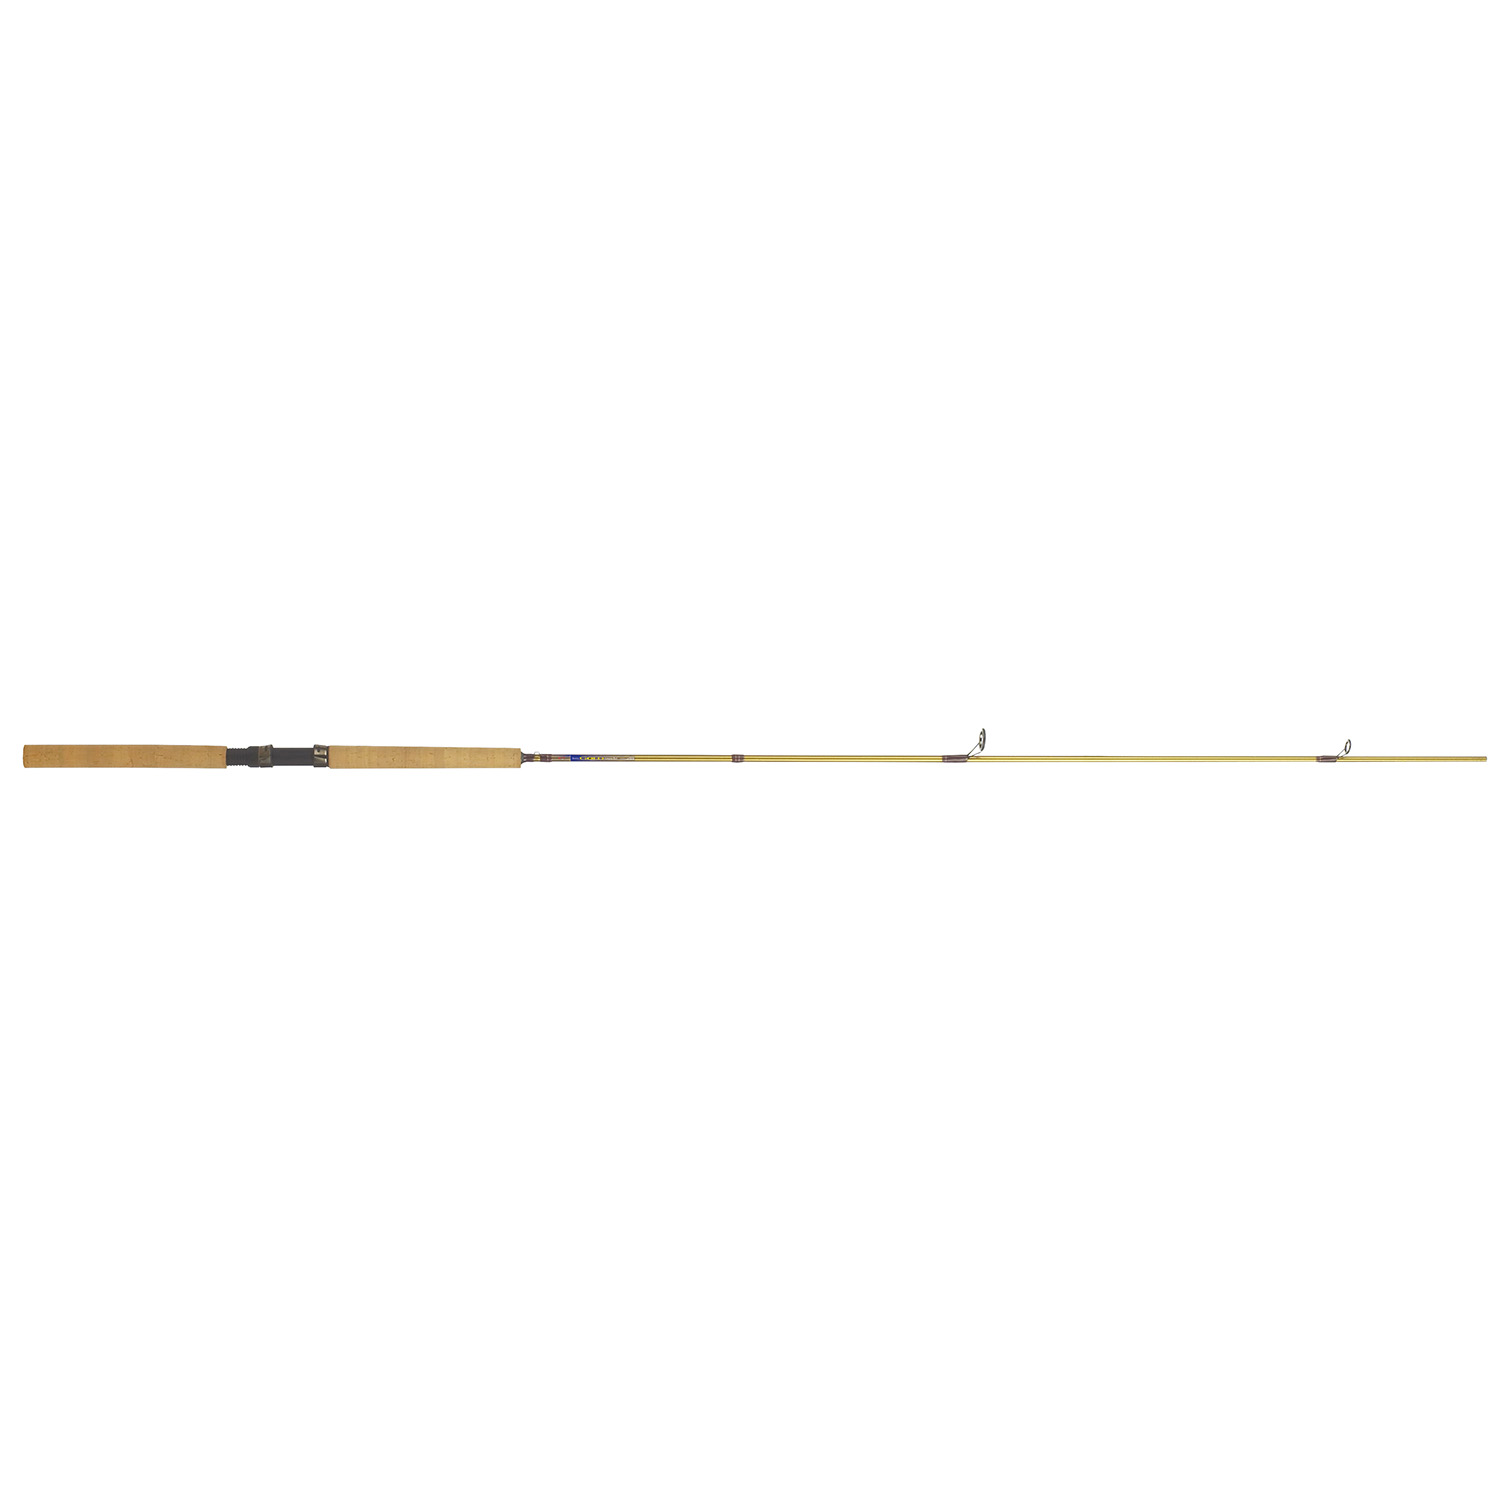 BNM Fishing Bucks Gold Jig Pole GOLD102 , $7.50 Off with Free S&H